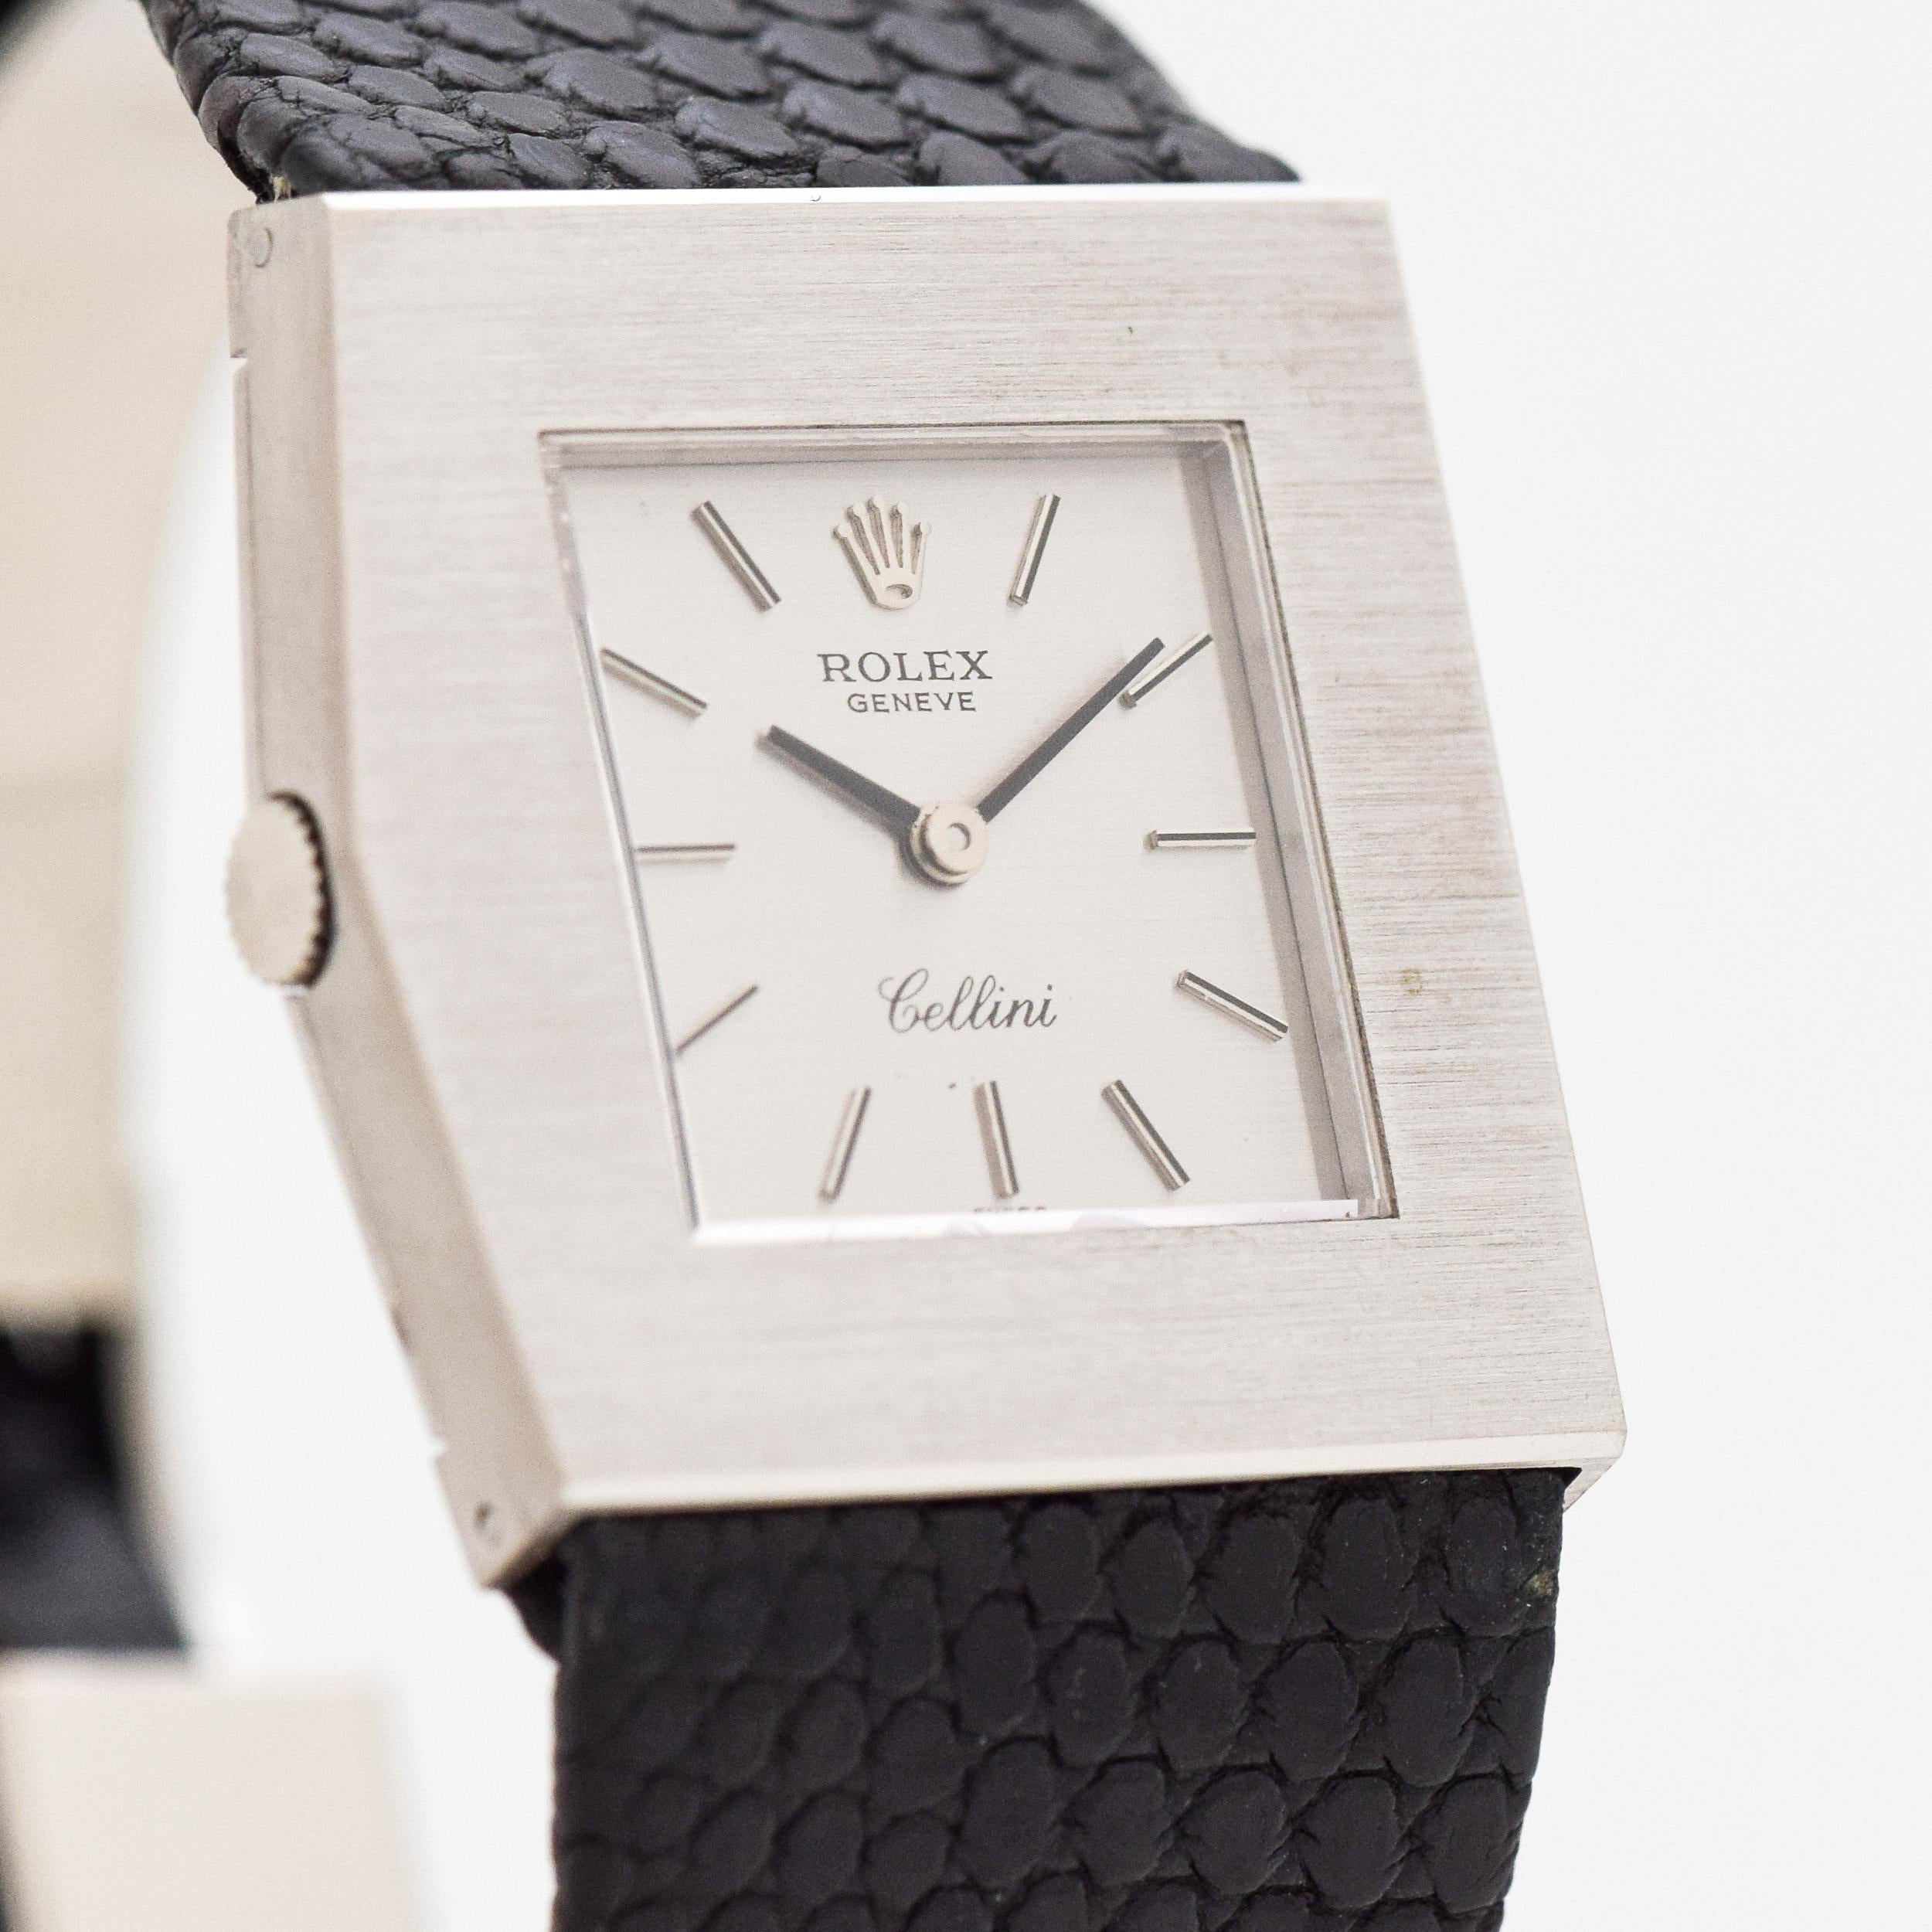 1970's (Early) Vintage Rolex Cellini King Midas Ref. 4017-10 18k White Gold watch with Silver Dial with Original Rolex Lizard Strap and Original Stainless Steel Rolex Buckle. 27mm x 27mm lug to lug (1.06 in. x 1.06 in.) - 18 jewel, manual caliber